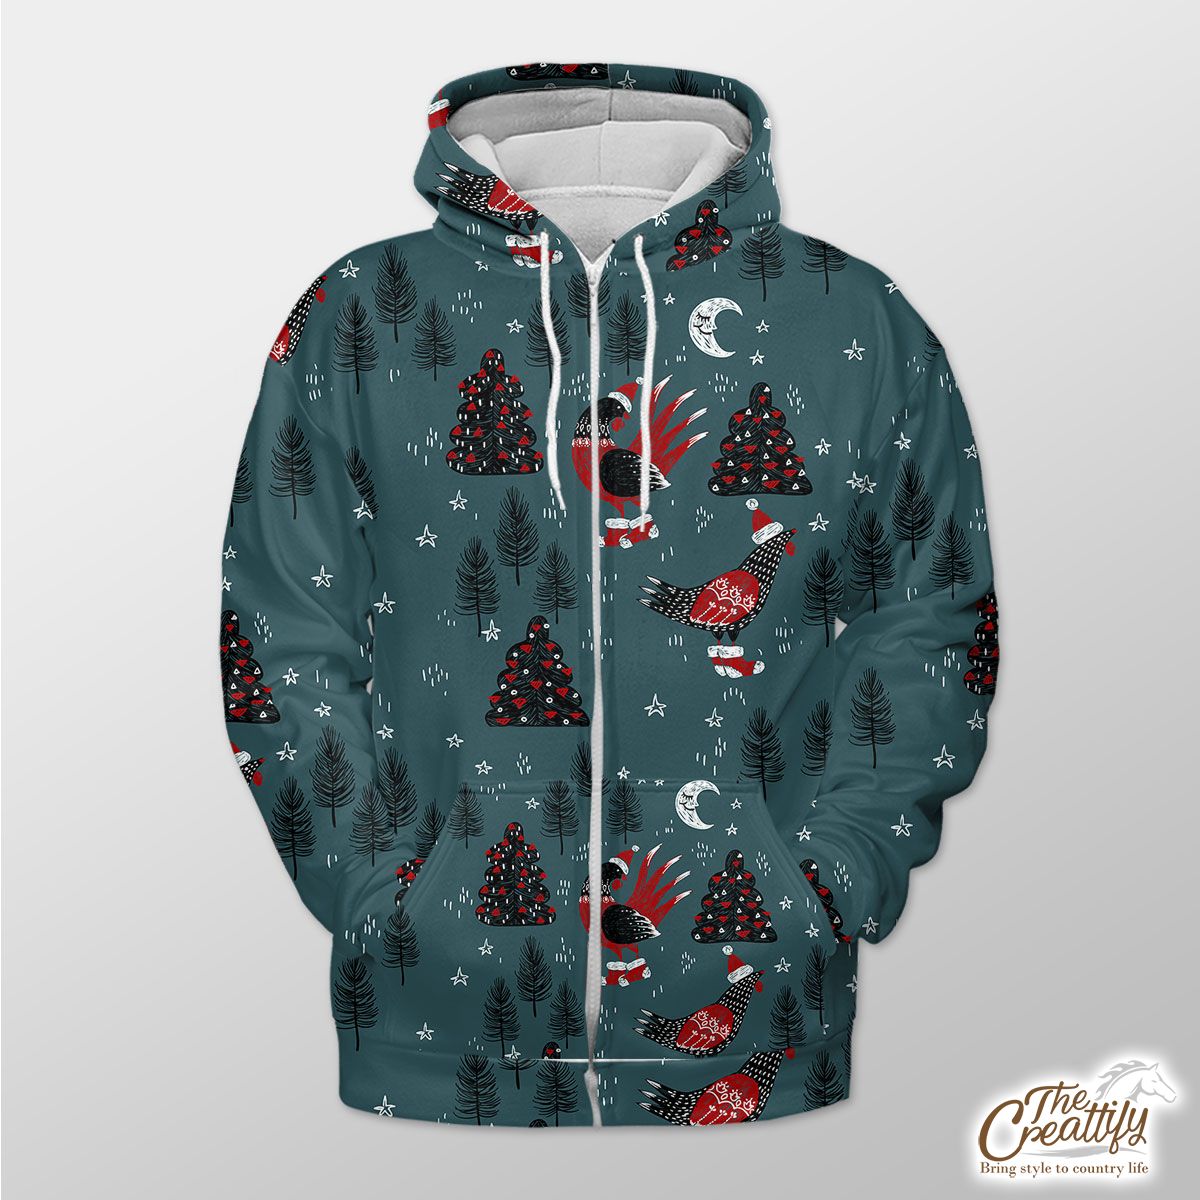 Christmas Turkey With Santa Hat, Sweater And Red Socks On The Pine Tree Background Zip Hoodie